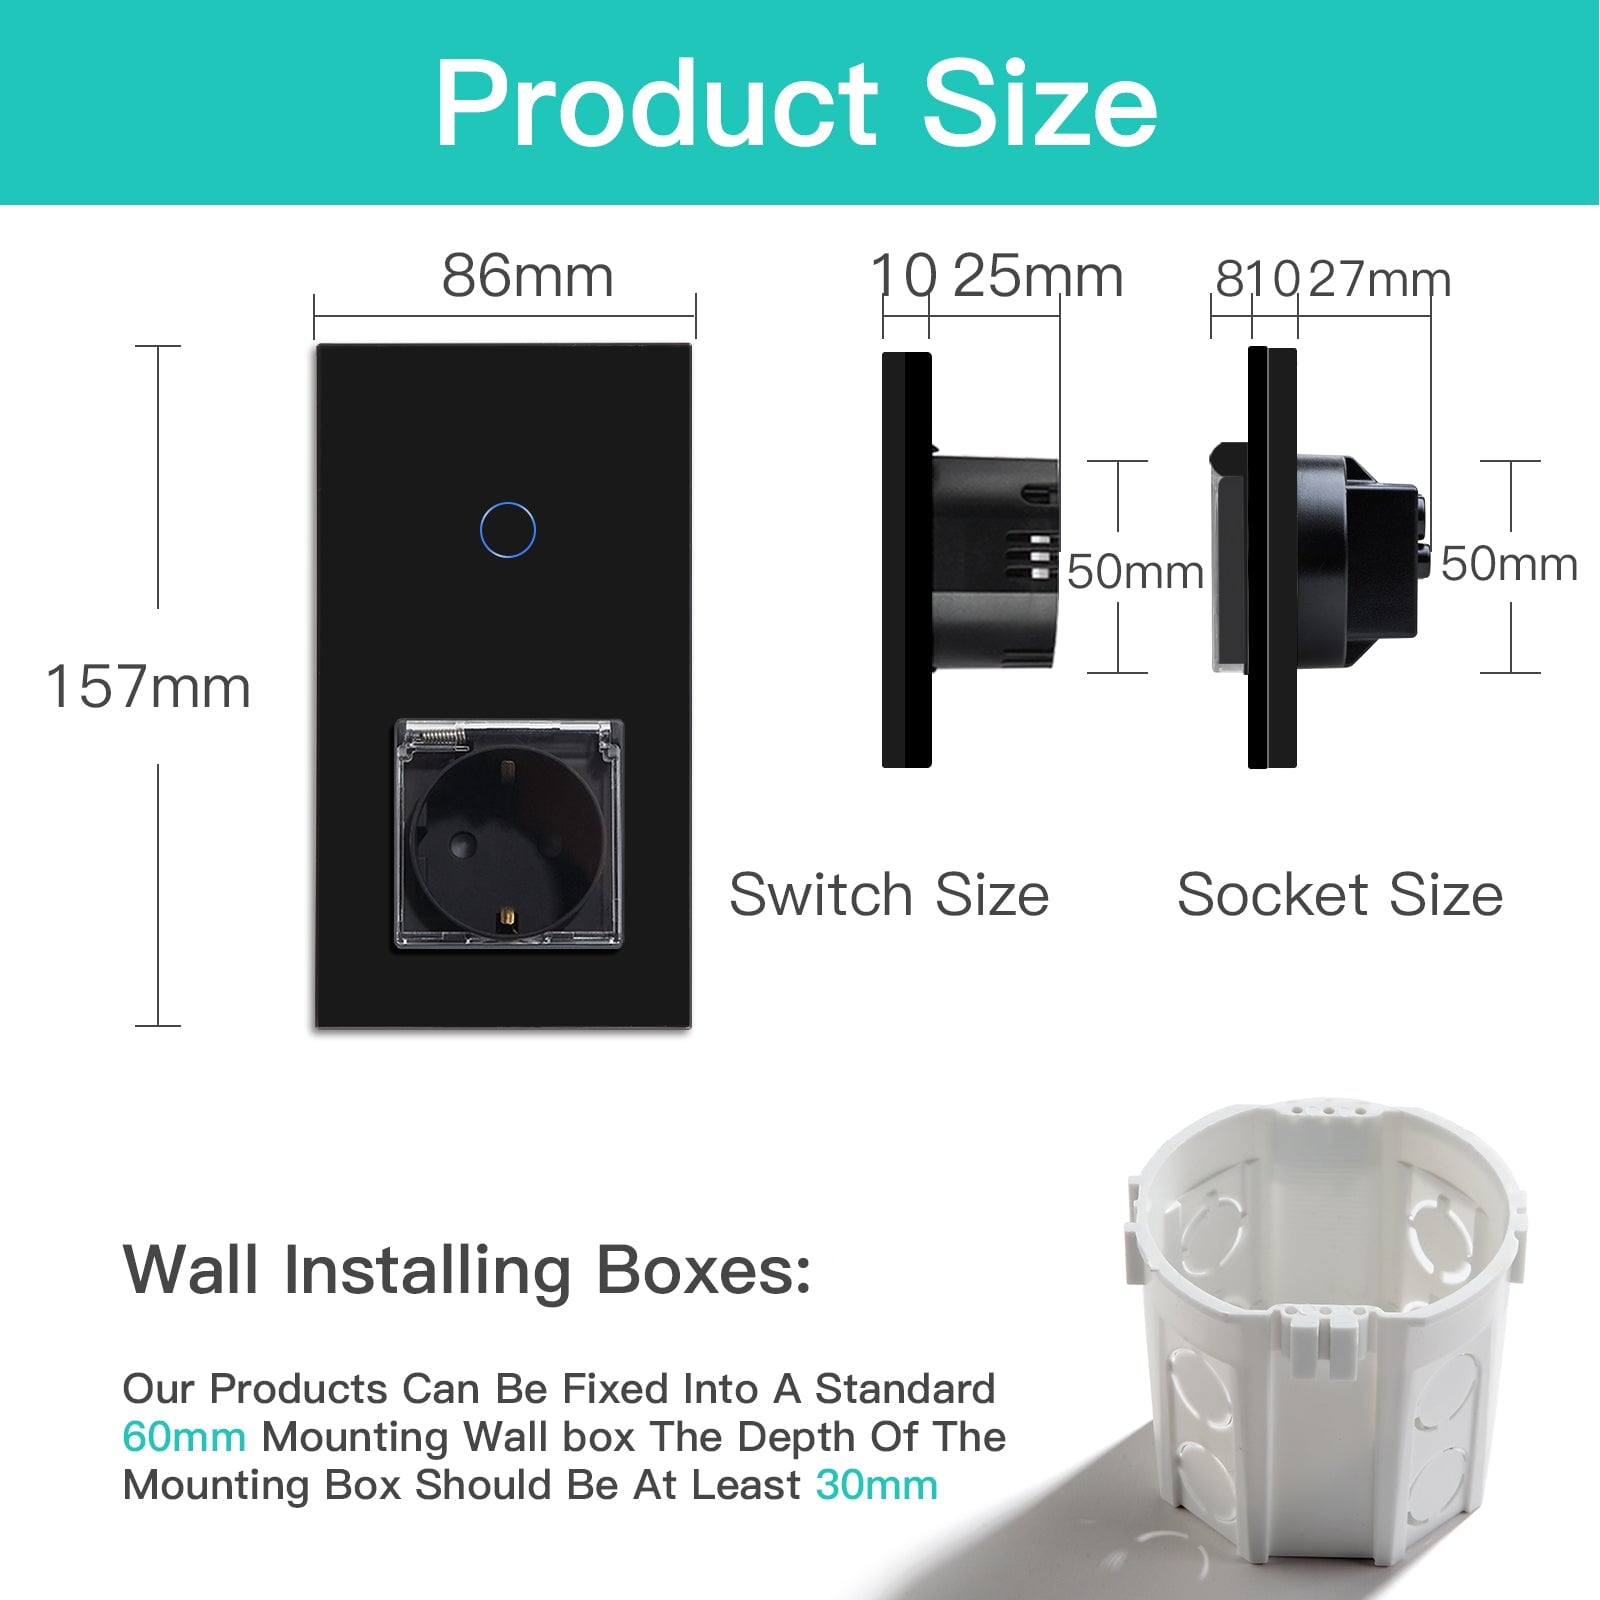 Bseed 1/2/3 Gang 1/2/3 Way Touch Light Switch with Waterproof Eu Socket 300W Wall Plates & Covers Bseedswitch 